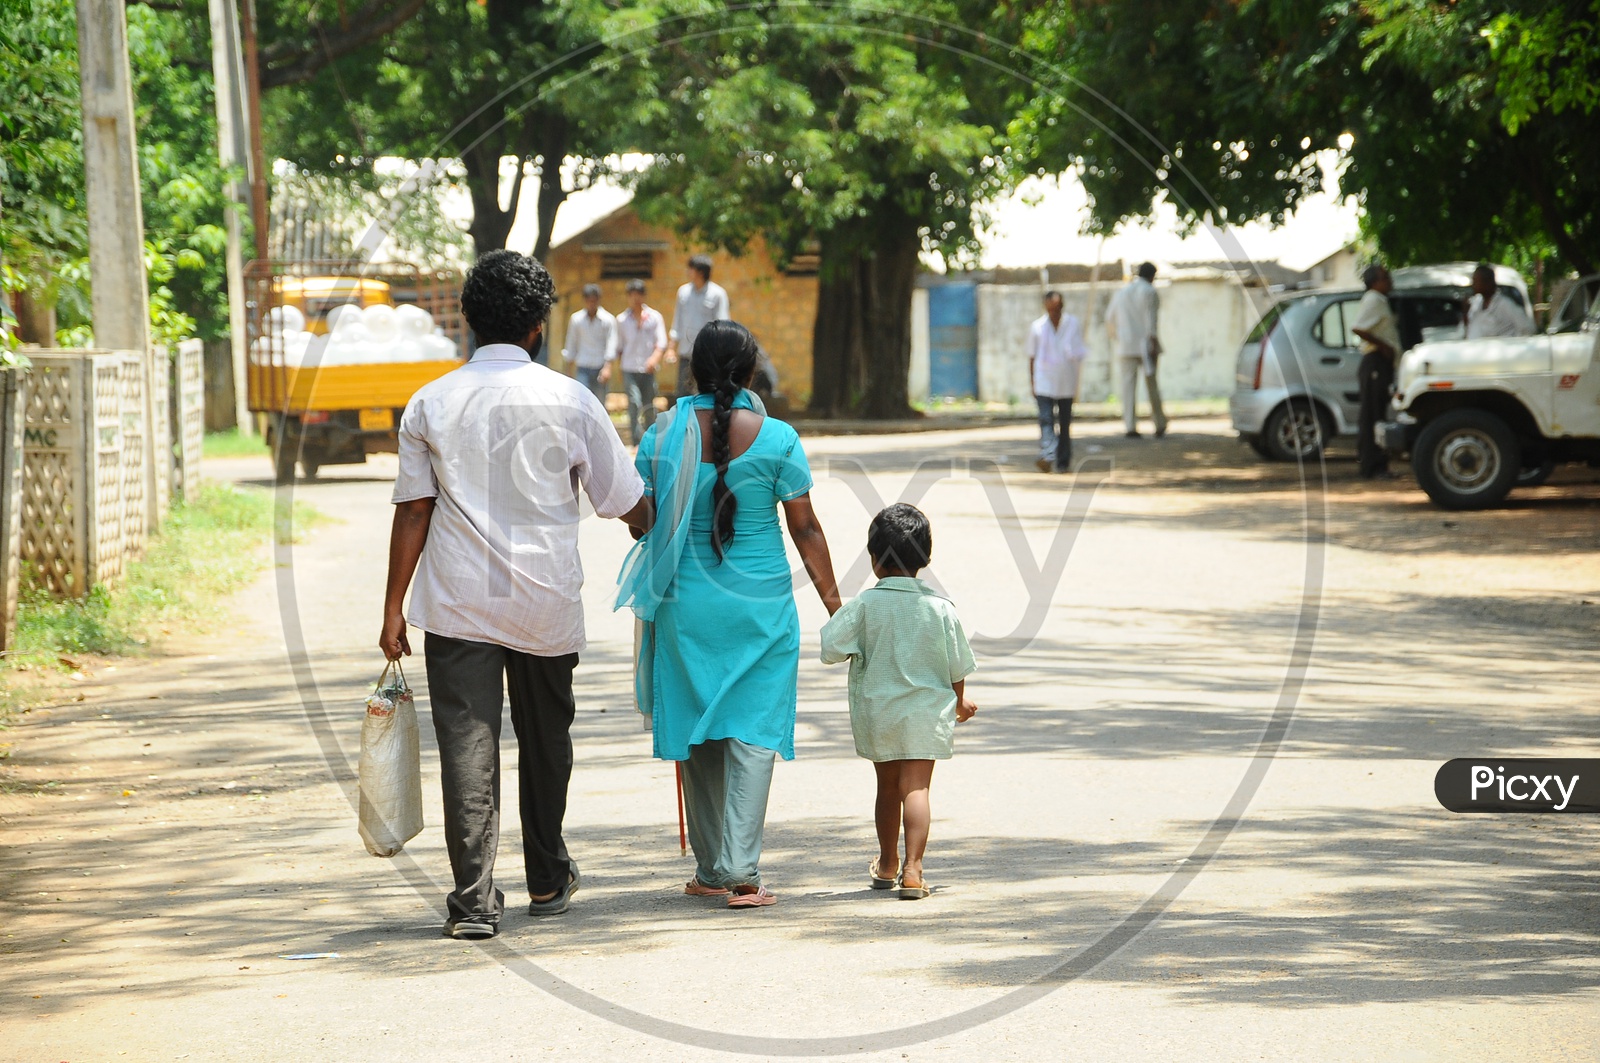 An Indian Family walking on the road